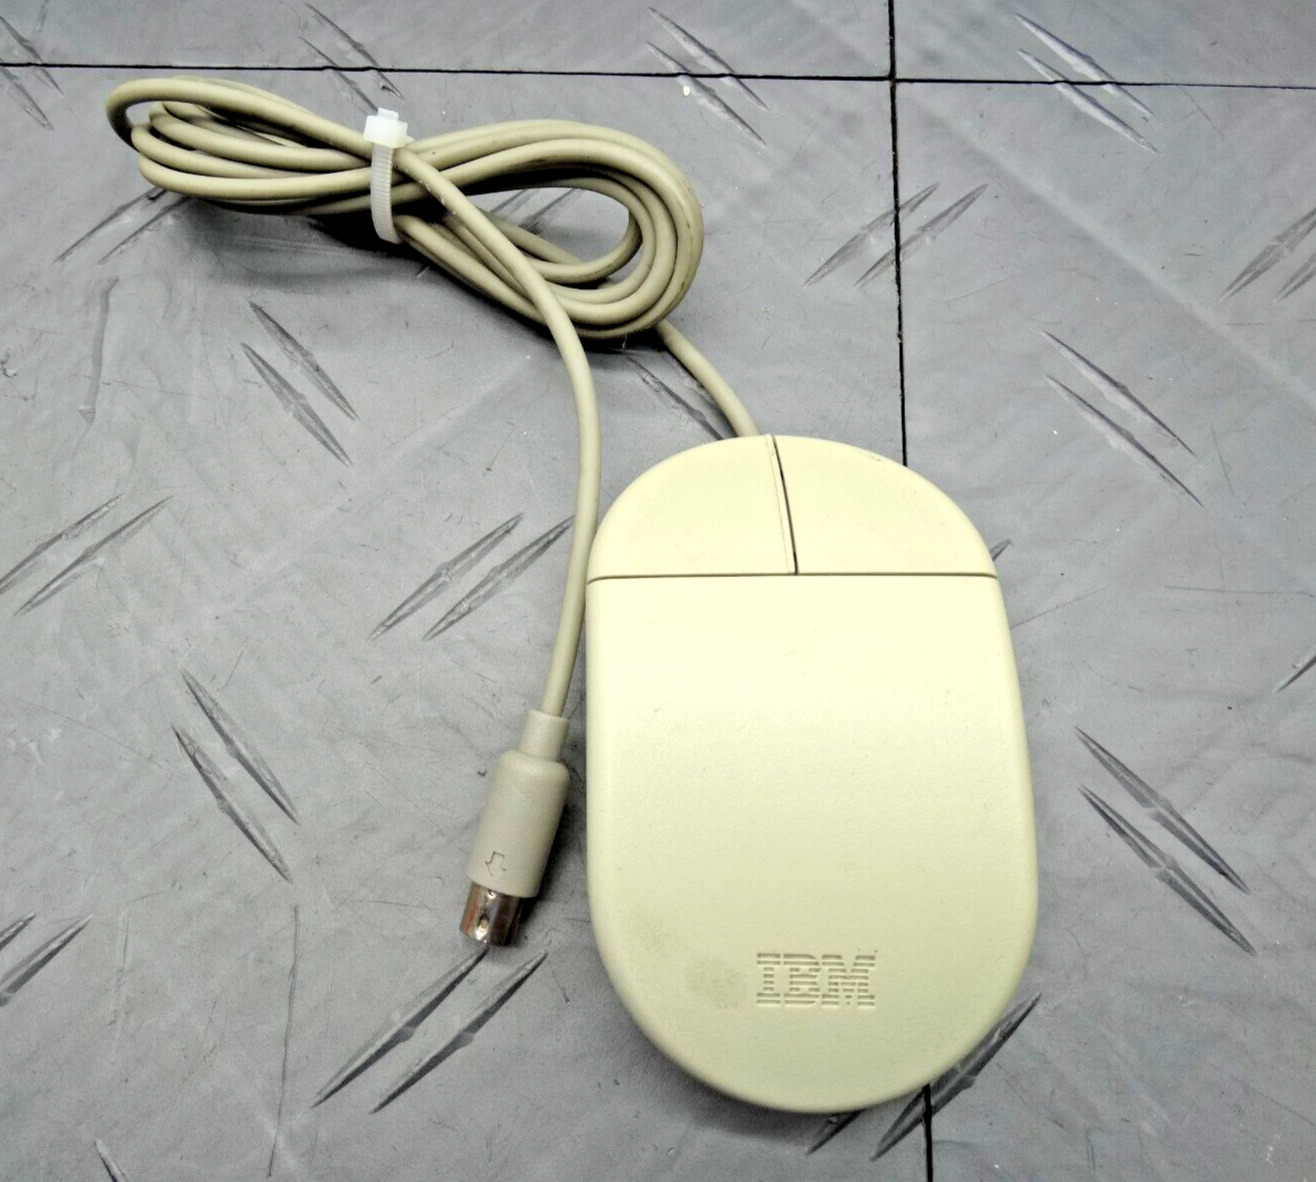 Vintage IBM 2 Button PS/2 Mouse Model 13H6690 Tested